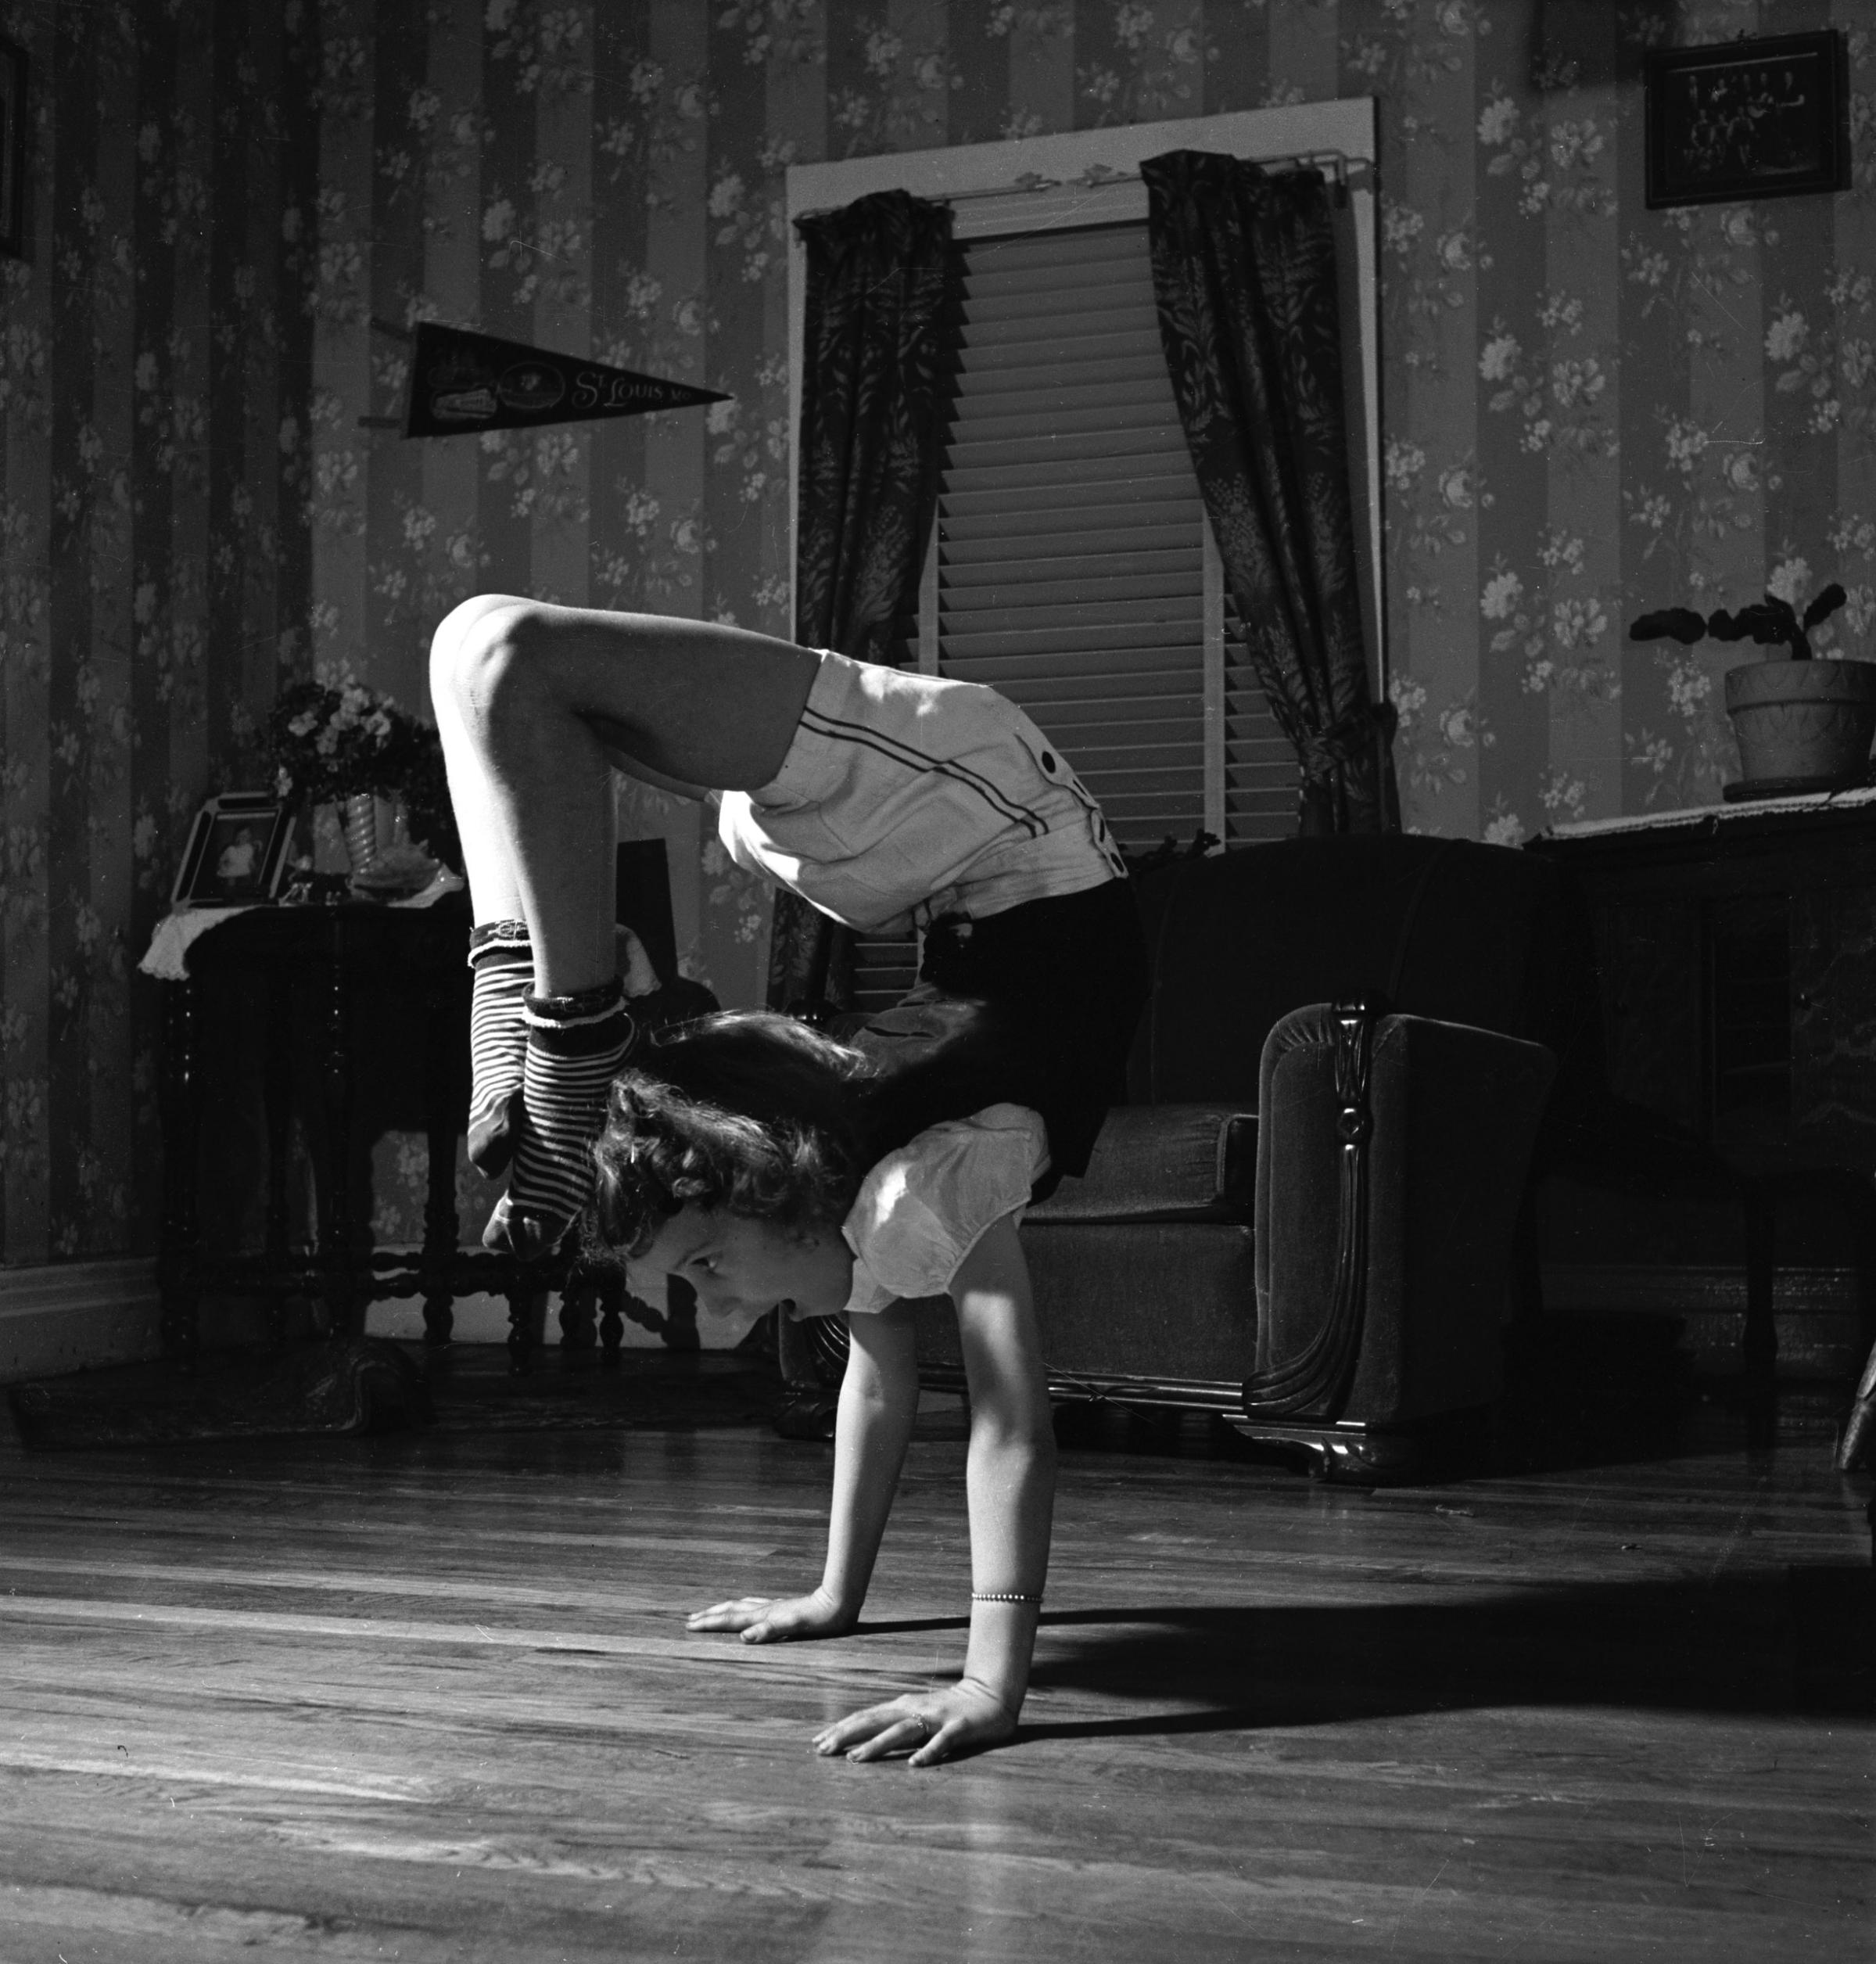 June Carter performing a hand stand in the living room of her family's home.